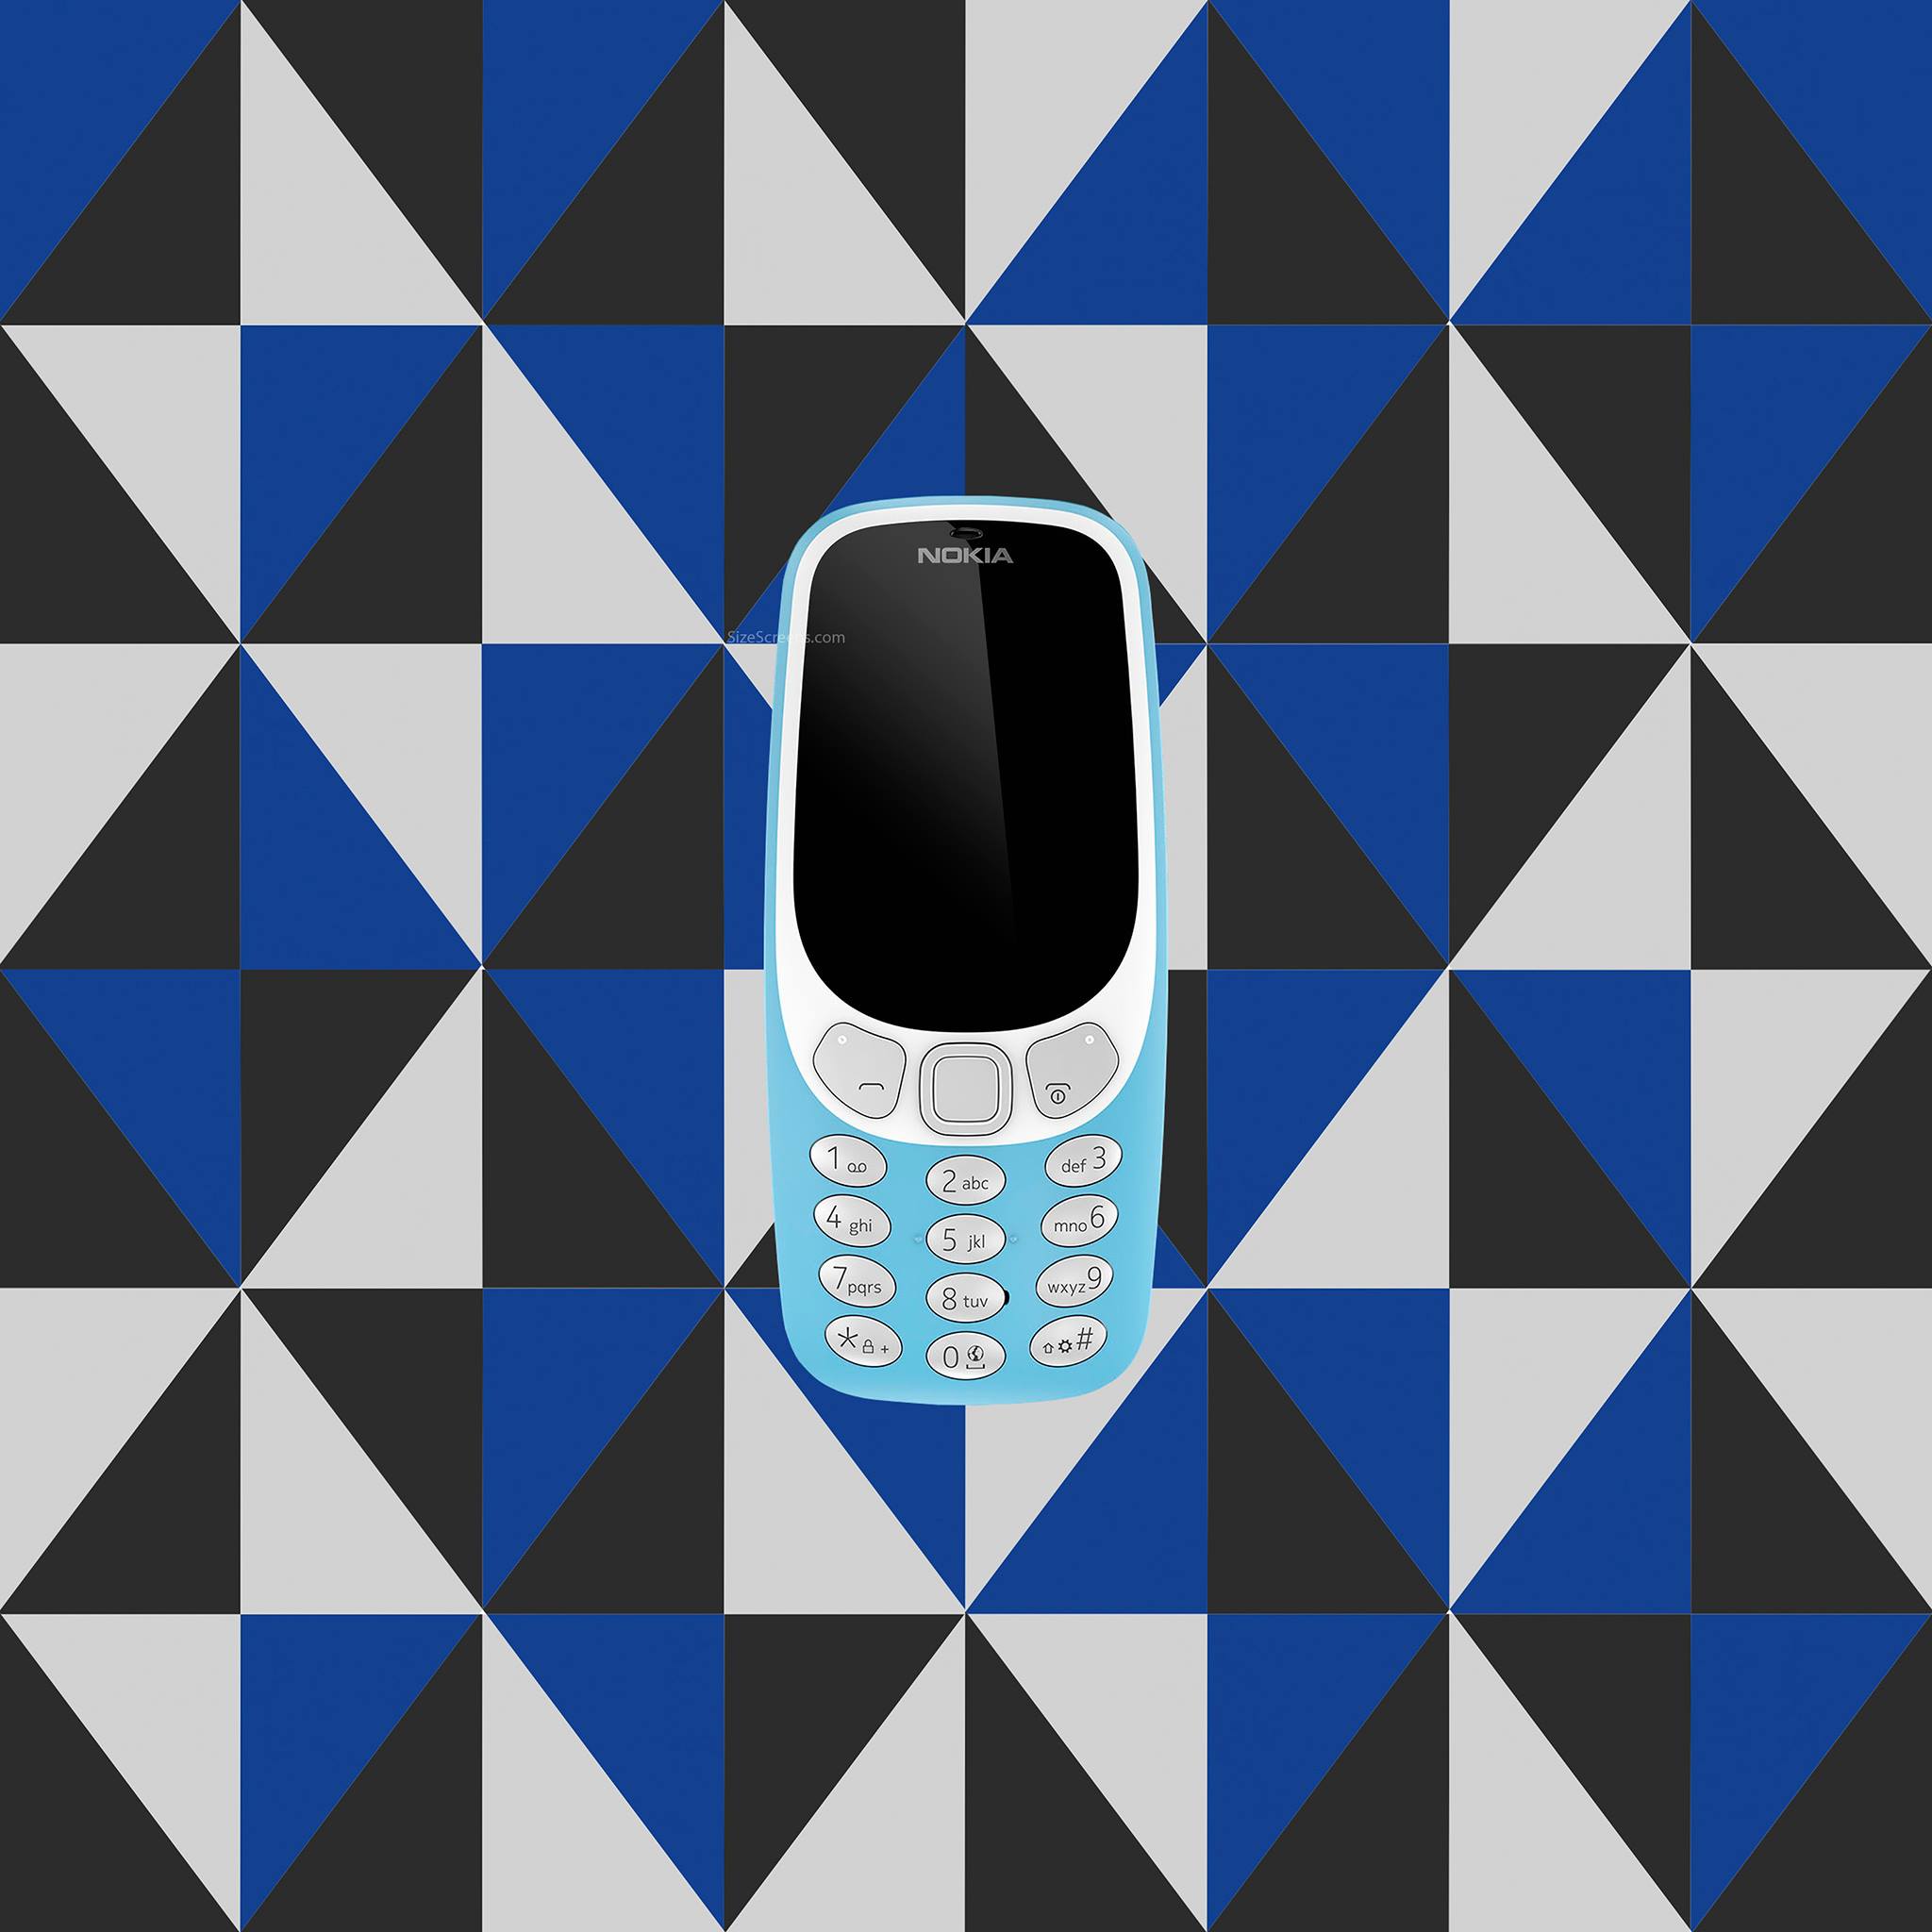 Nokia 3310 returns from the dead priced at 49  Neowin